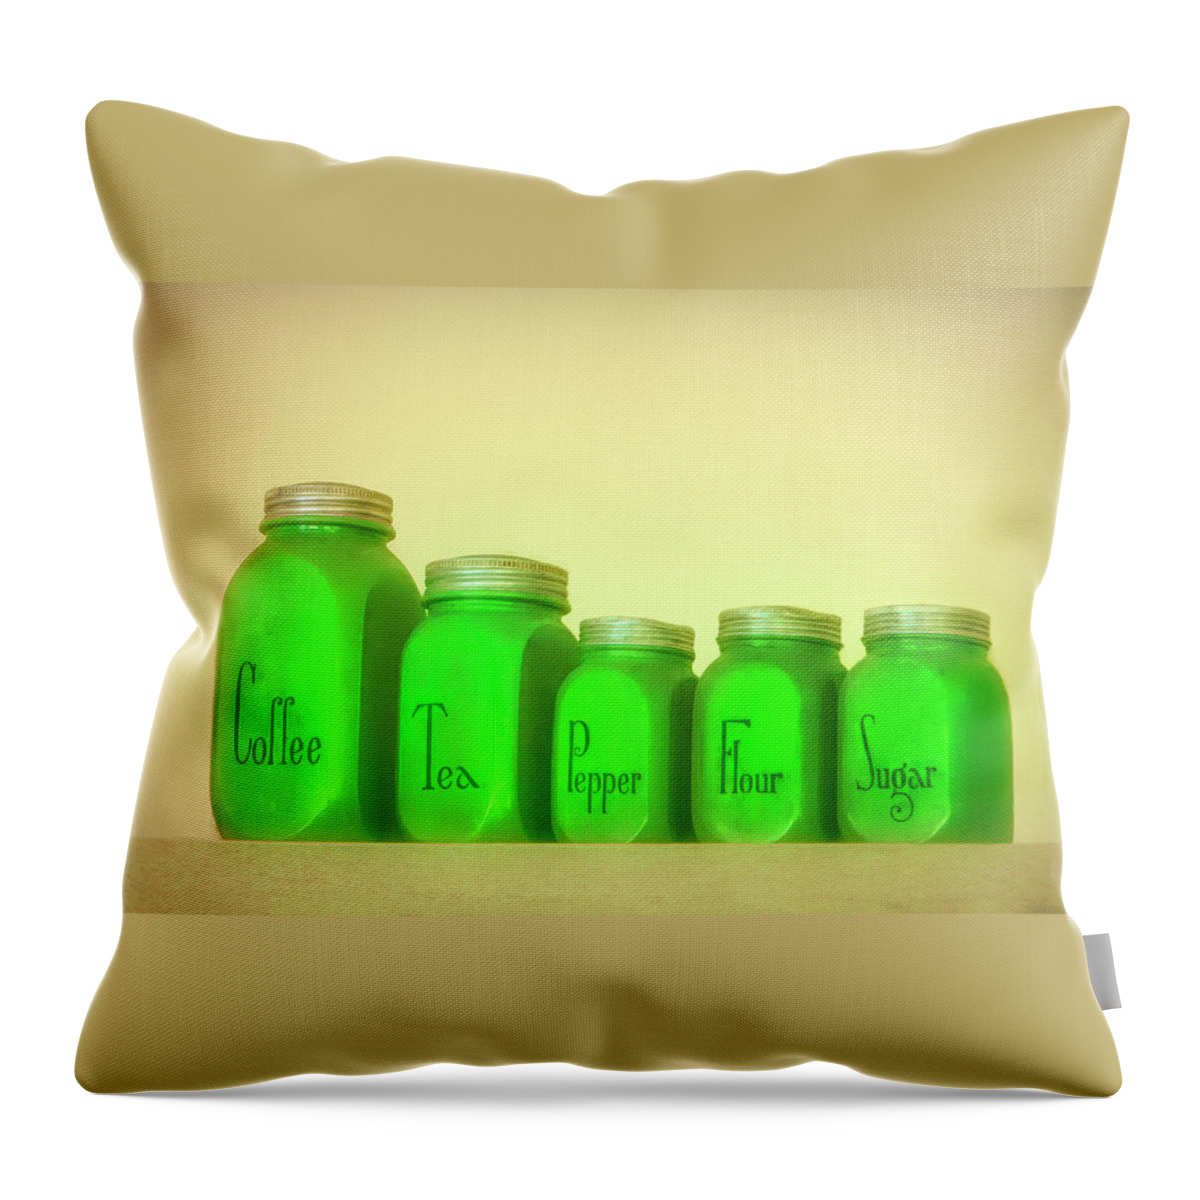 Container Throw Pillow featuring the photograph Vintage Kitchen Containers by Mitch Spence